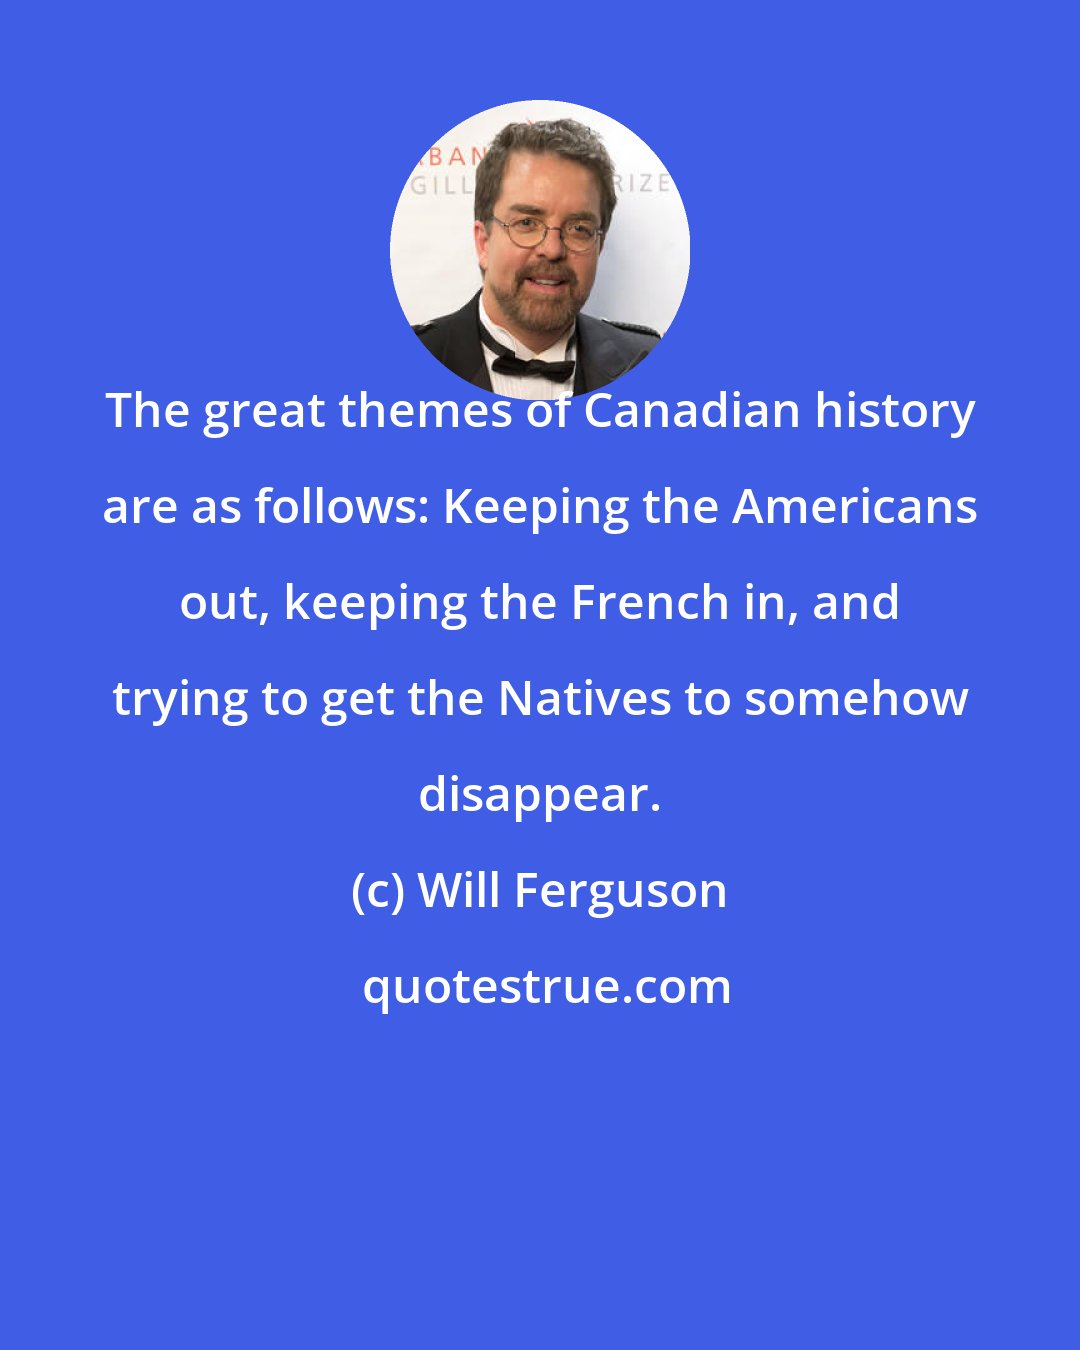 Will Ferguson: The great themes of Canadian history are as follows: Keeping the Americans out, keeping the French in, and trying to get the Natives to somehow disappear.